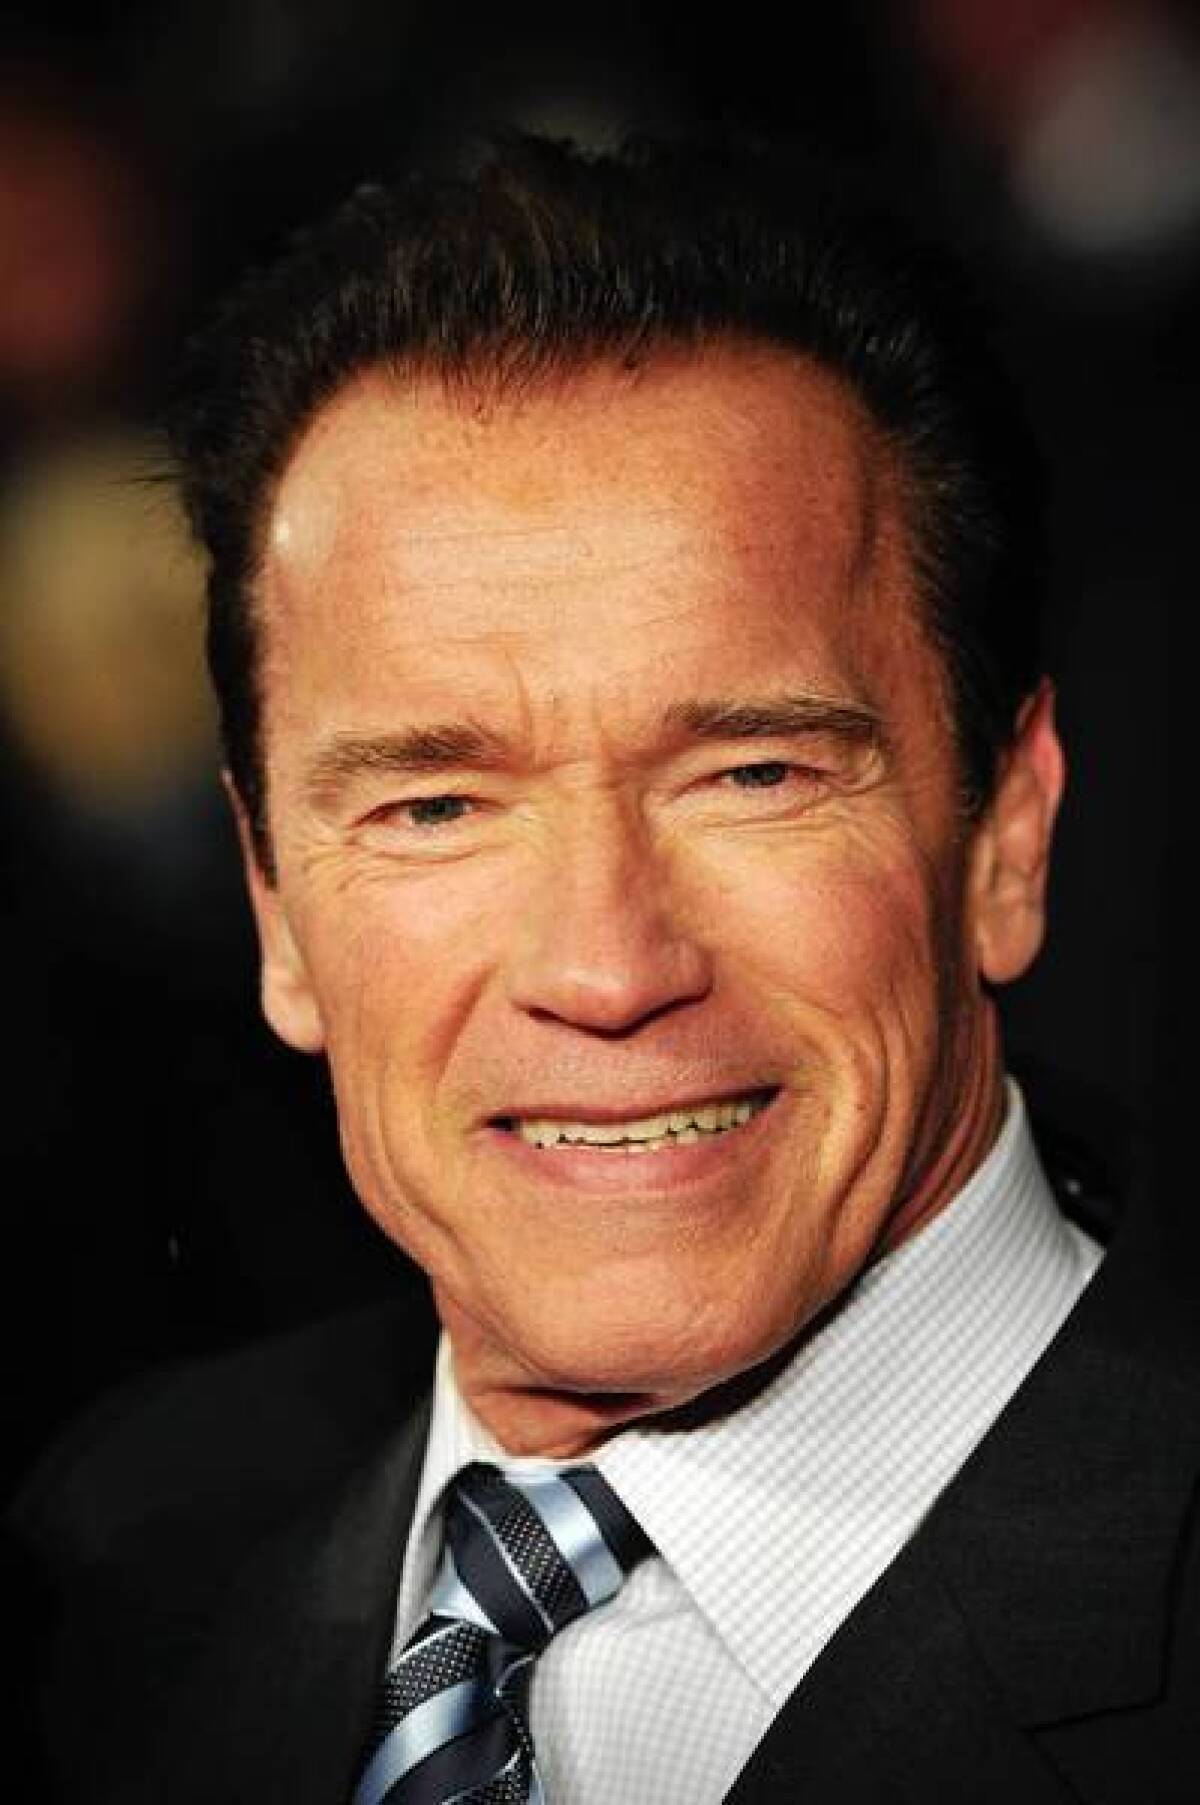 Arnold Schwarzenegger said he was excited to revive his former magazine gig.